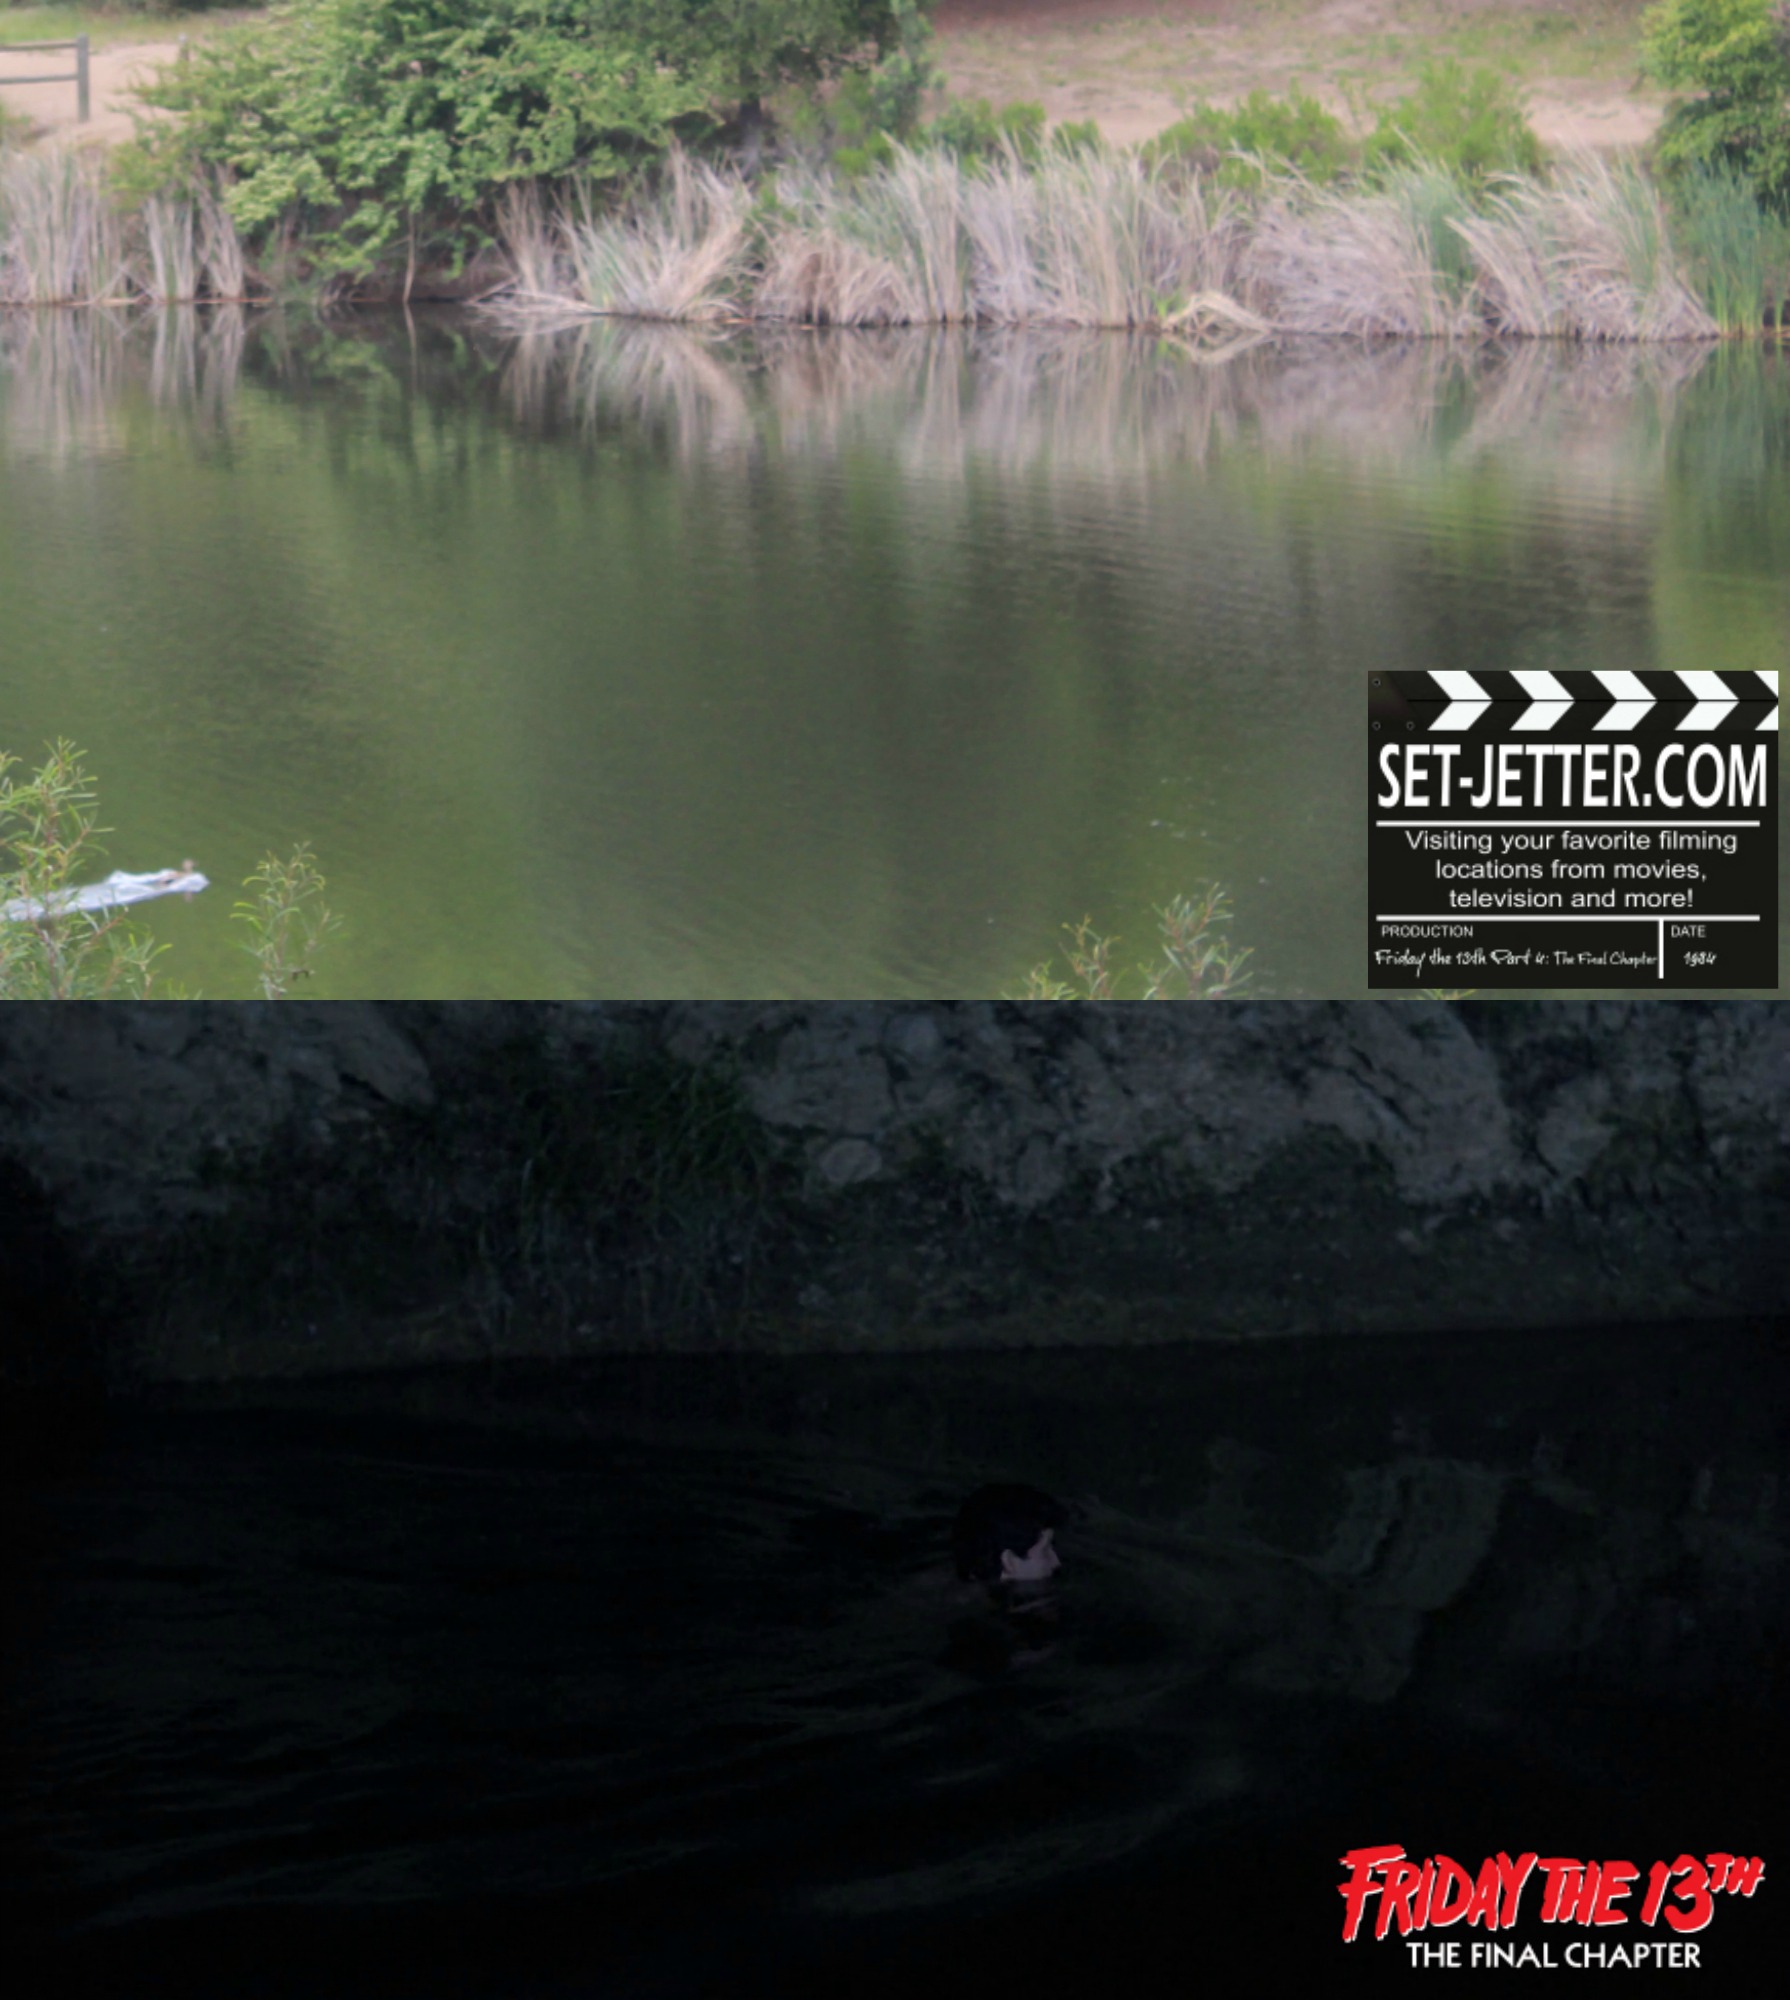 Friday the 13th The Final Chapter comparison 93.jpg